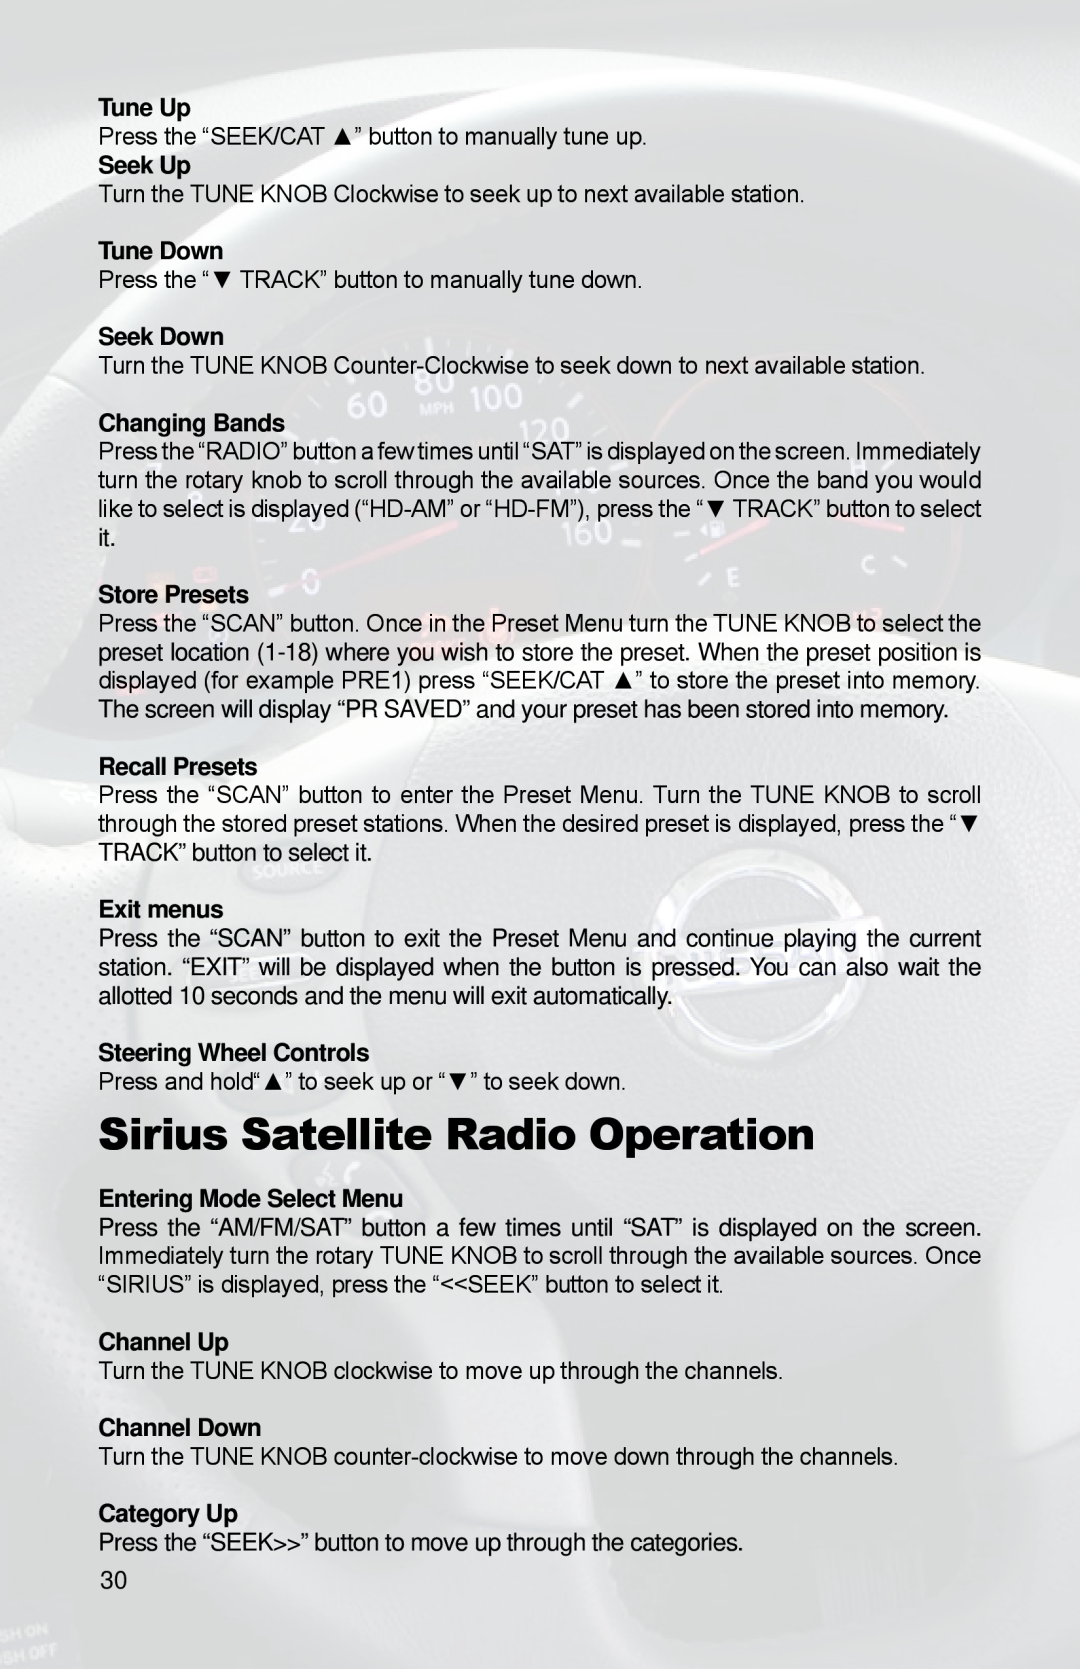 iSimple PGHNI2 owner manual Sirius Satellite Radio Operation, Press the “SEEK/CAT ” button to manually tune up 